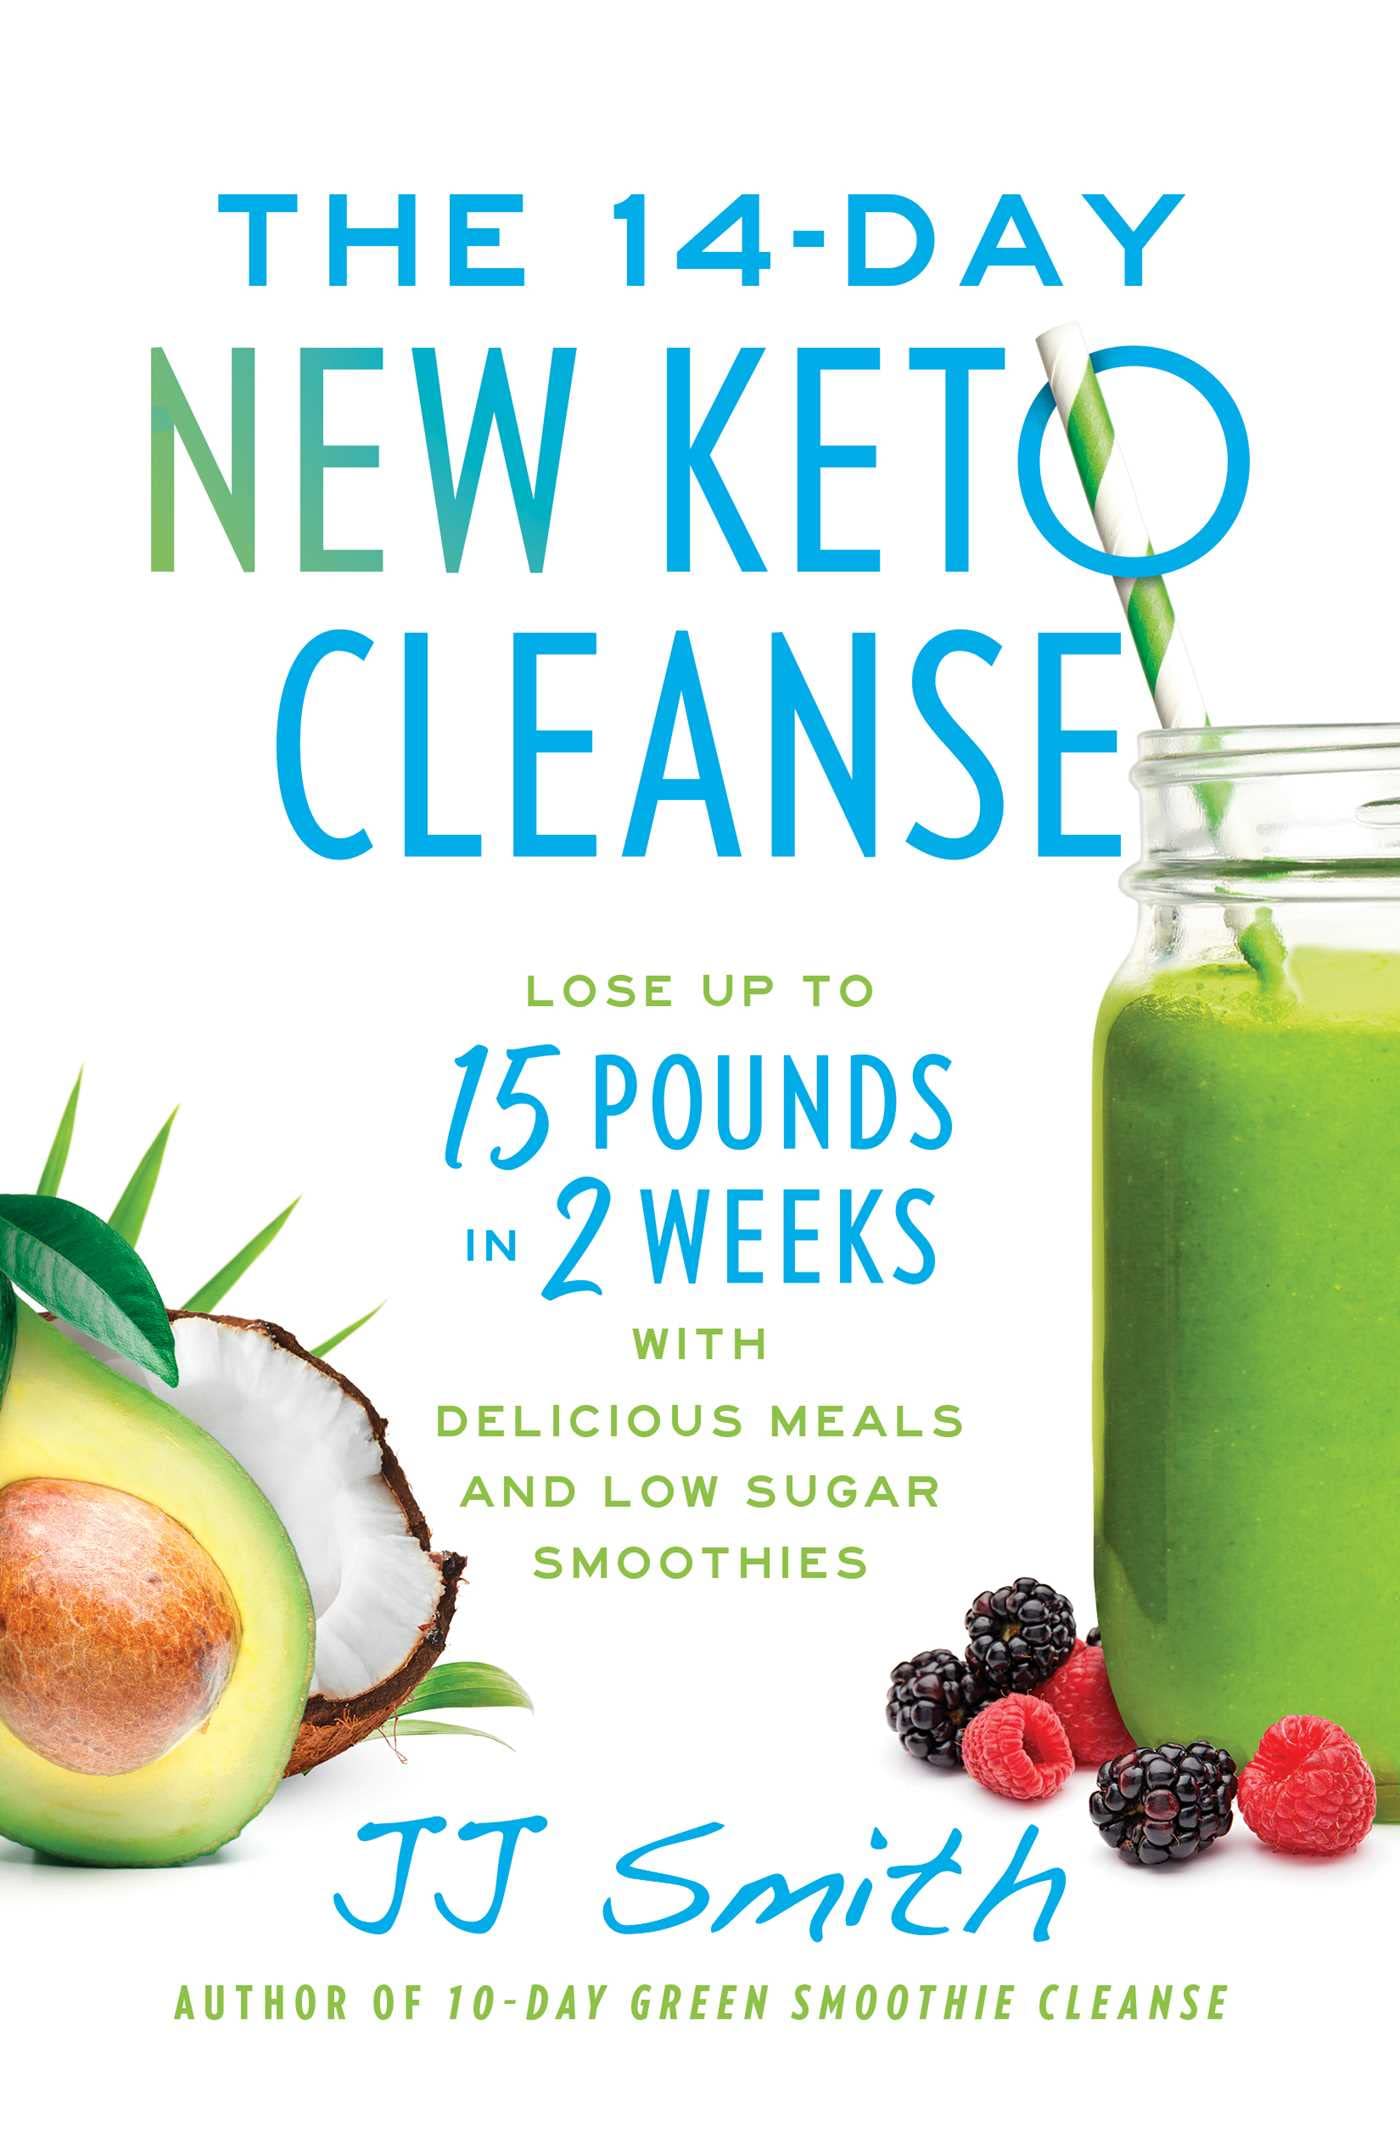 The 14-Day New Keto Cleanse: Lose Up to 15 Pounds in 2 Weeks - SureShot Books Publishing LLC